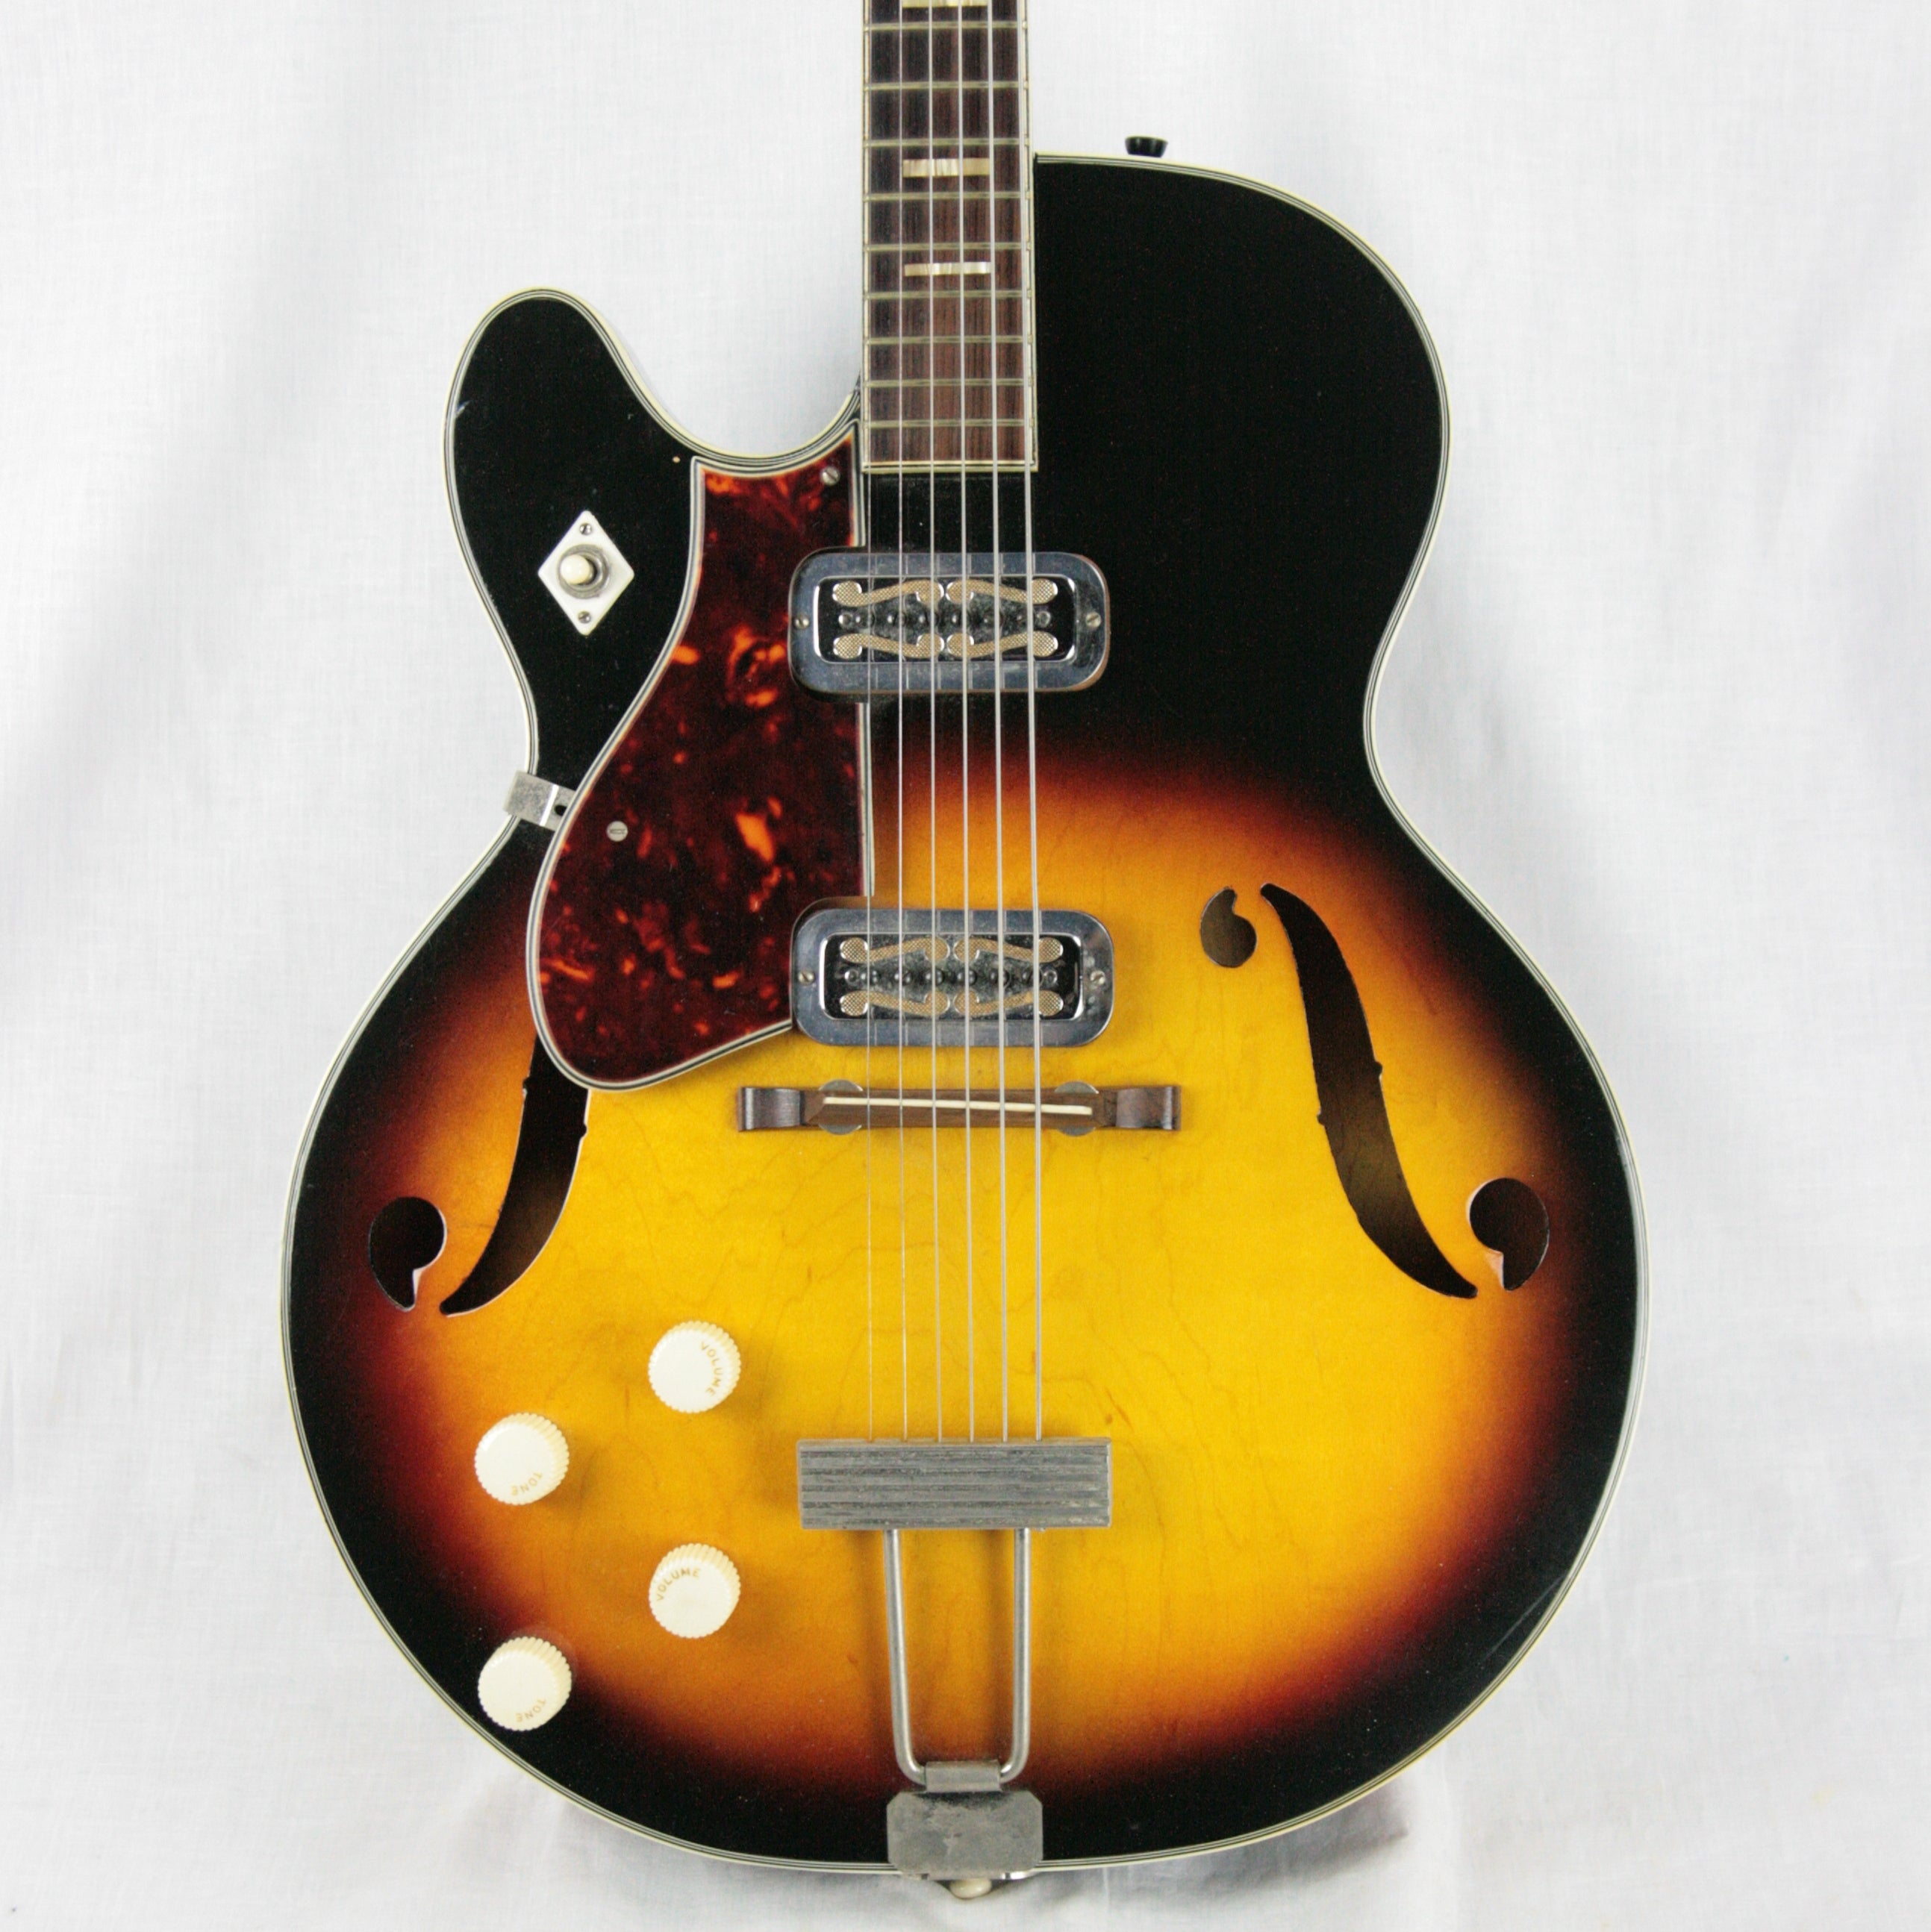 *SOLD*  c 1960 Harmony H-70 Meteor LEFT-HANDED Guitar! Vintage Hollowbody! Keith Richards